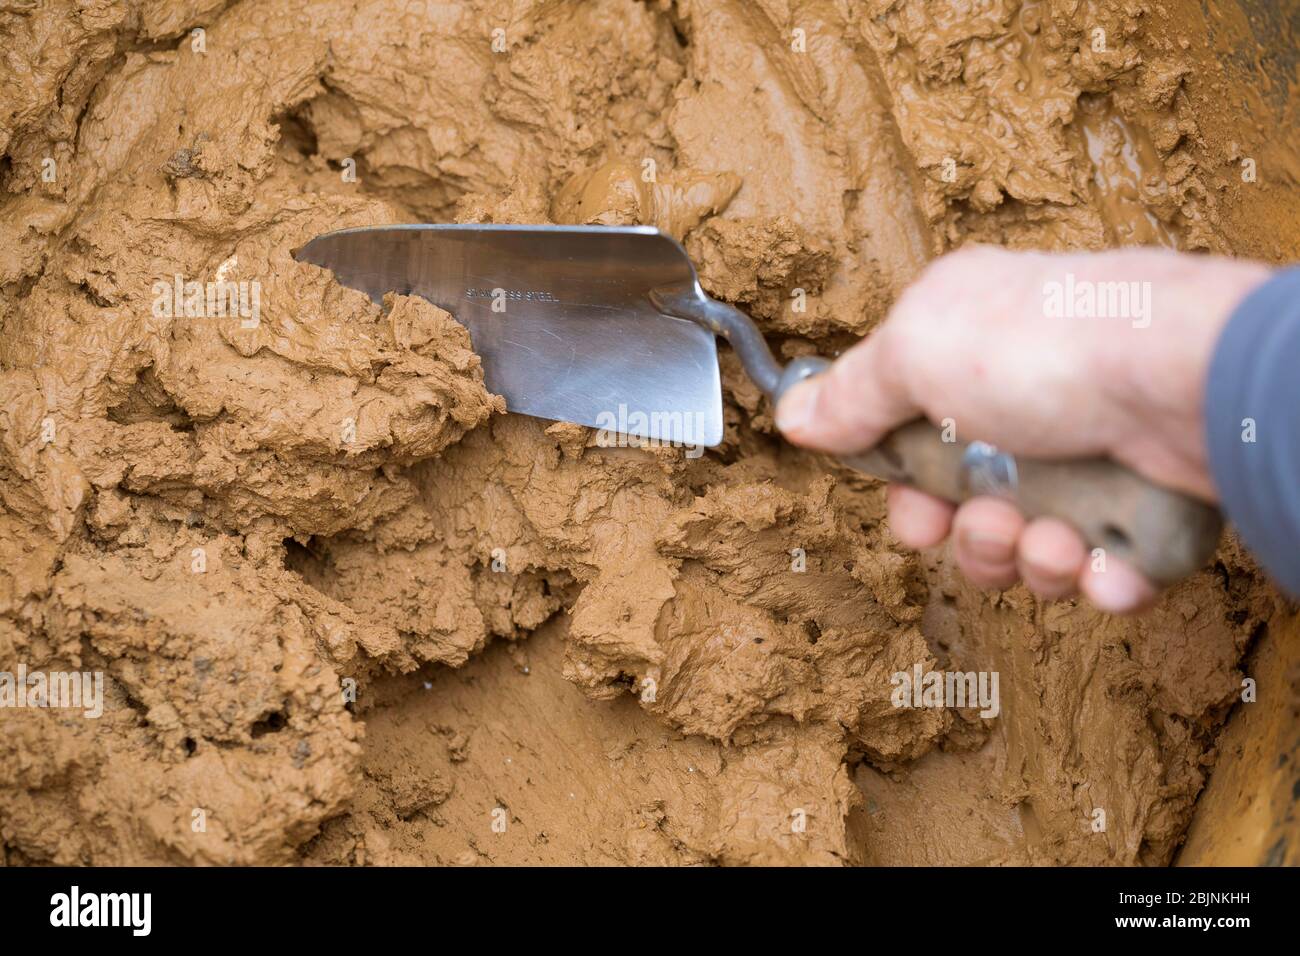 wild bee nesting aid made with mud, merging of clay with water and sand, series picture 1/5, Germany Stock Photo